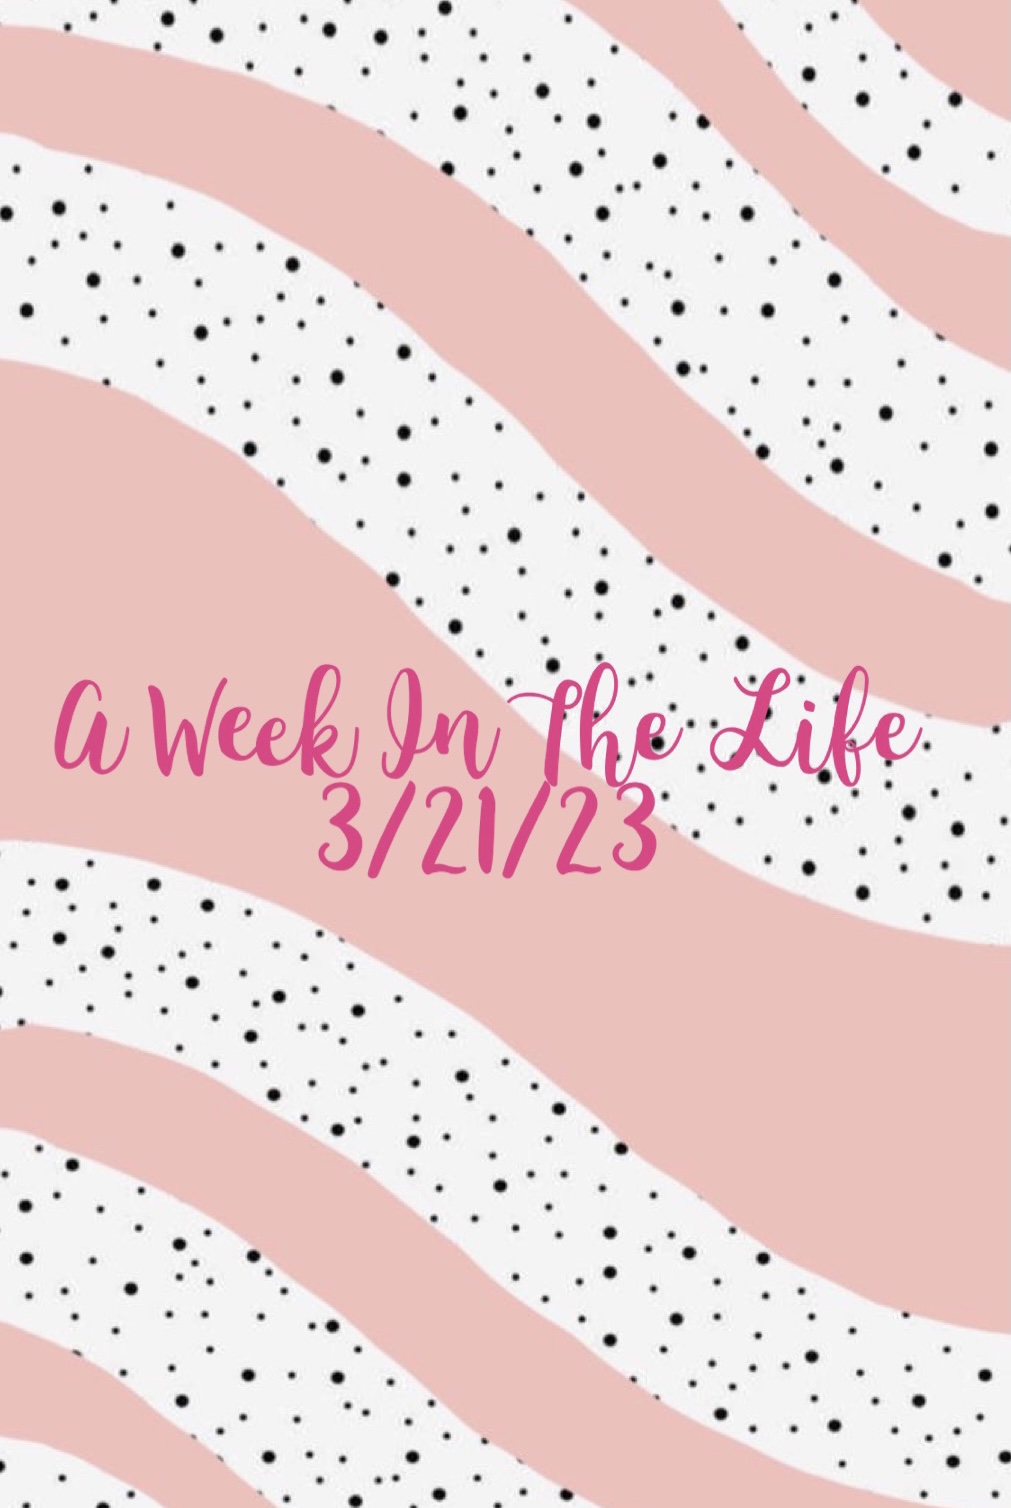 A Week In The Life 3/21/22